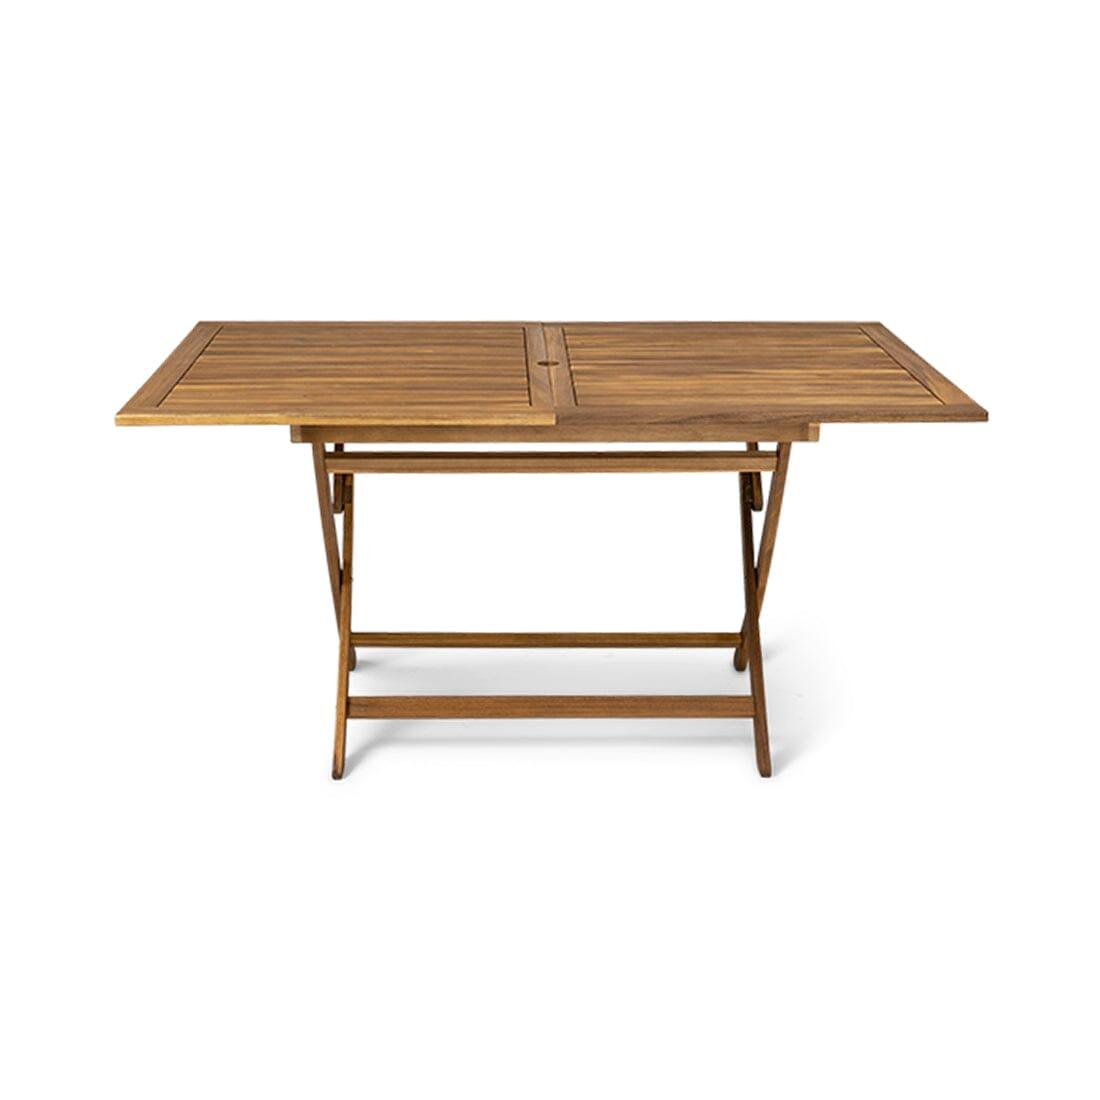 Ackley Large Solid Wood Folding Table